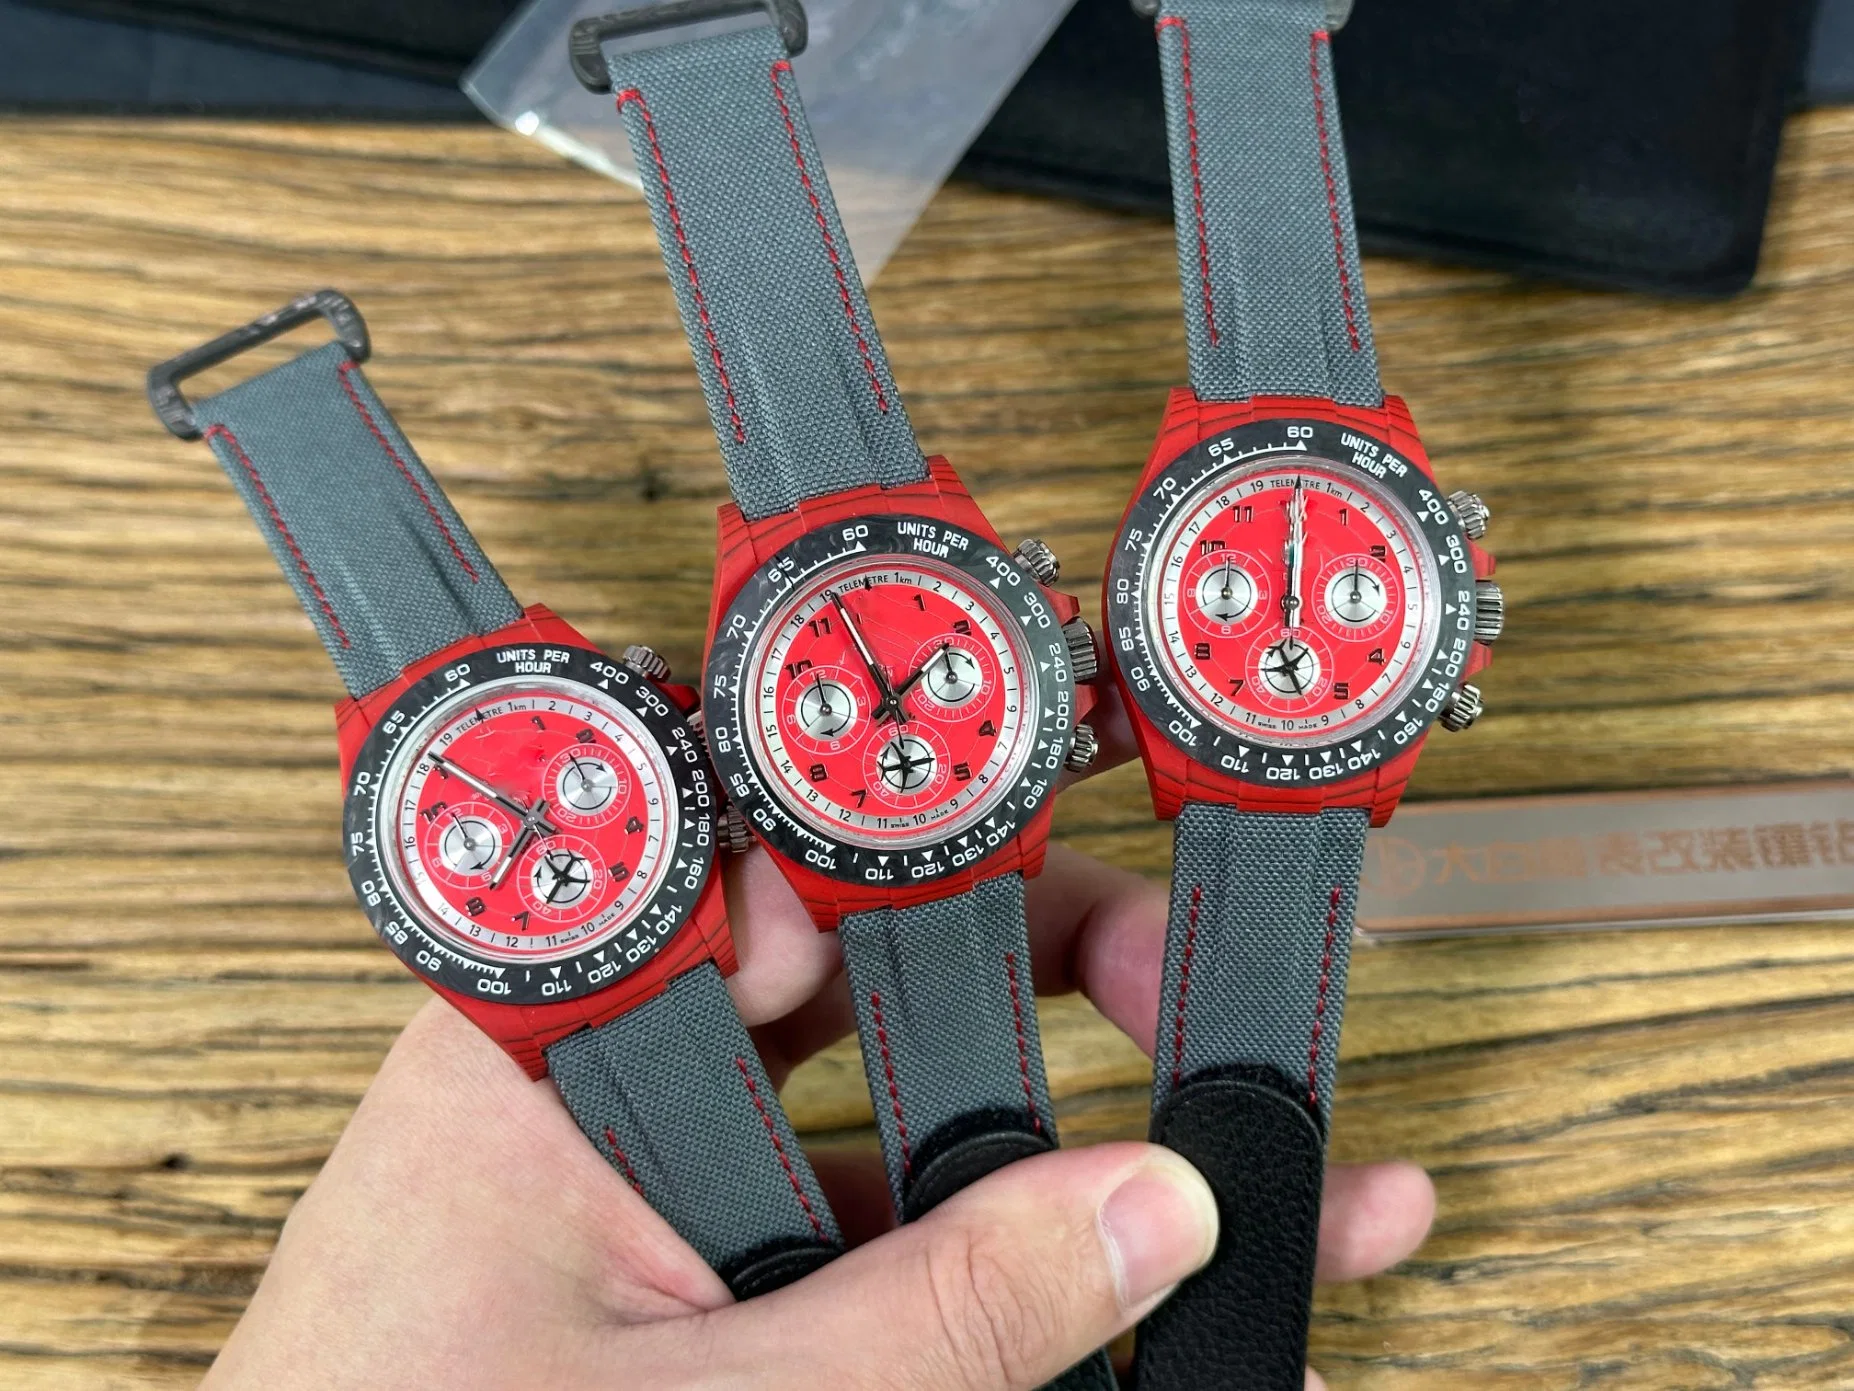 Super Clone 5A Red Carbon Fiber Airplane Dial, 4130 Movement Timing Fully Automatic Mechanical Watch, Nylon Strap Velcro